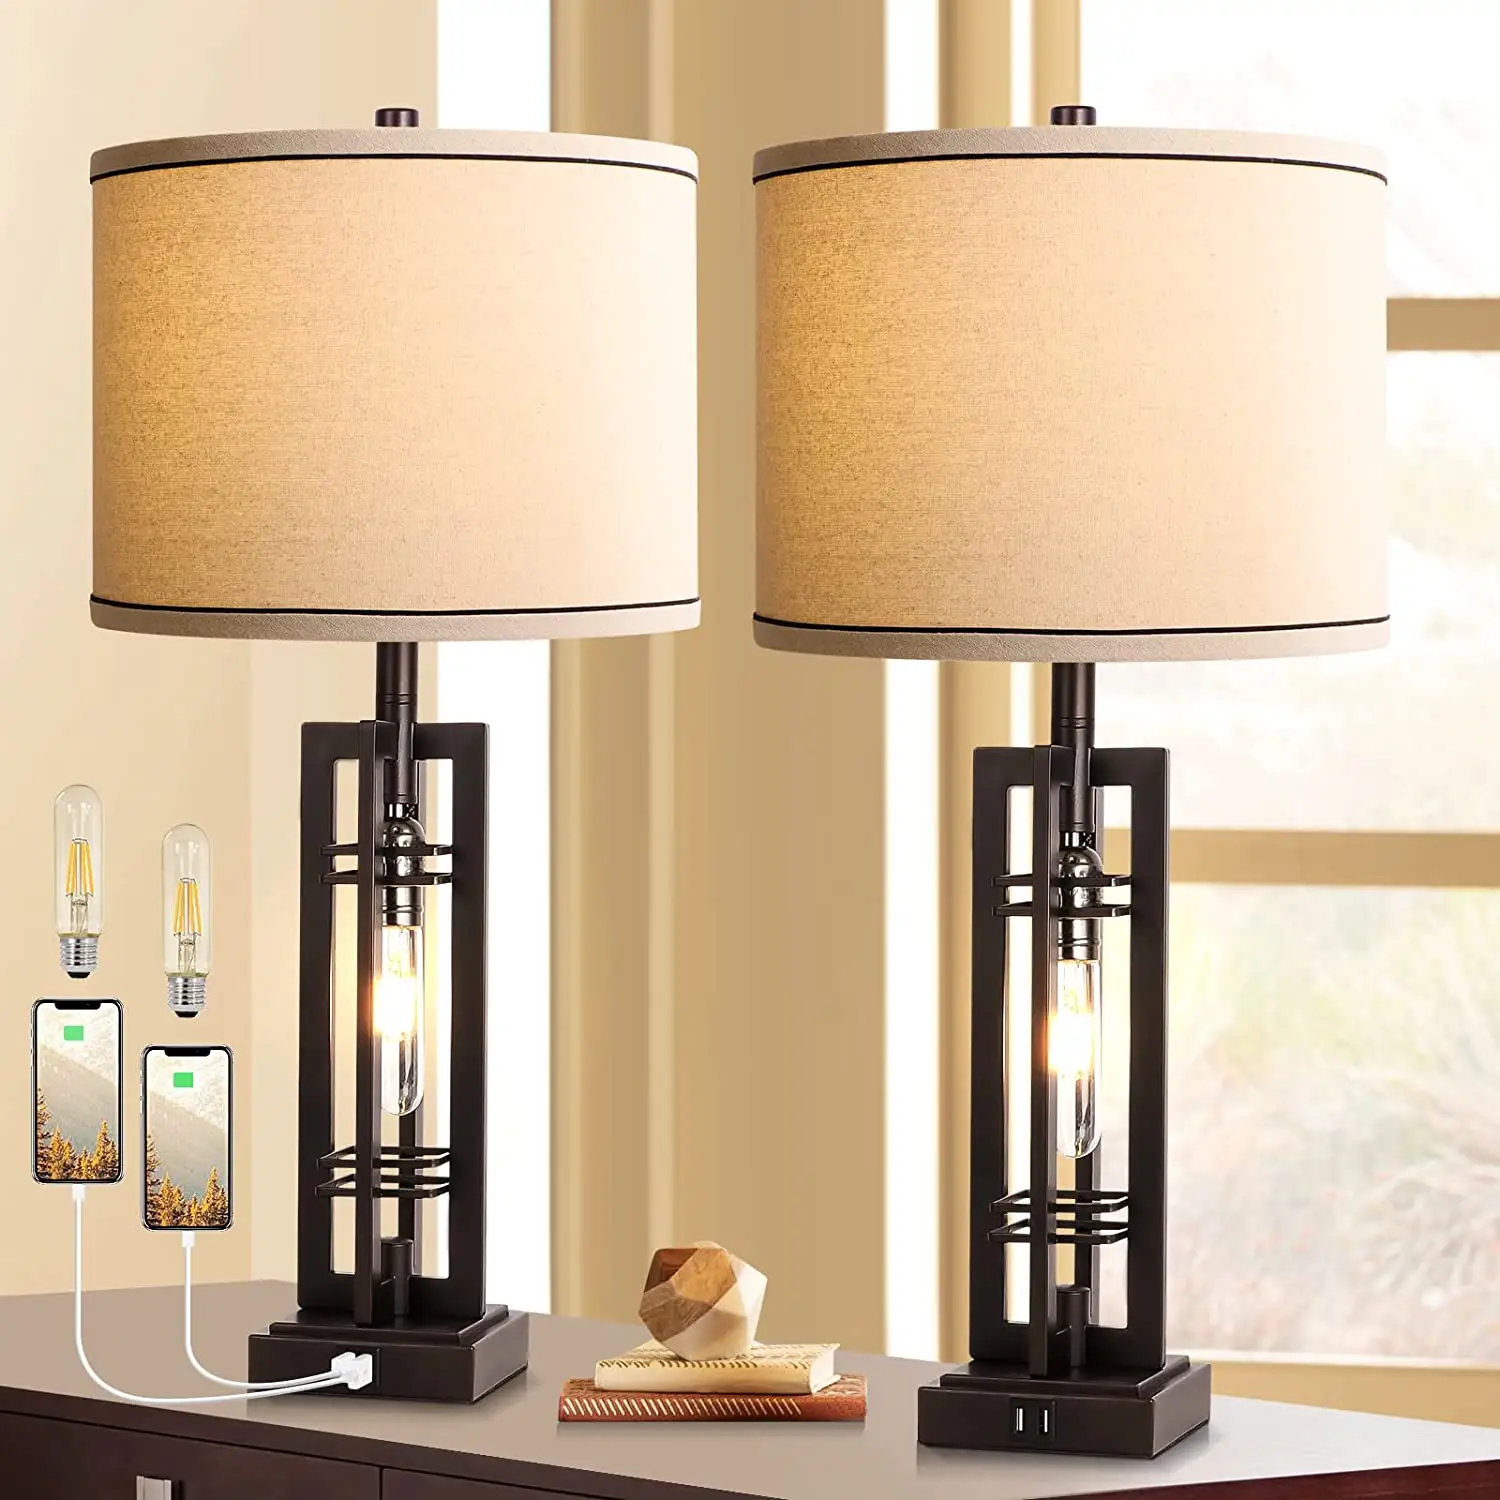 Table lamp with USB port oil finish bronze finish beige shade for living room bedroom home without bulb